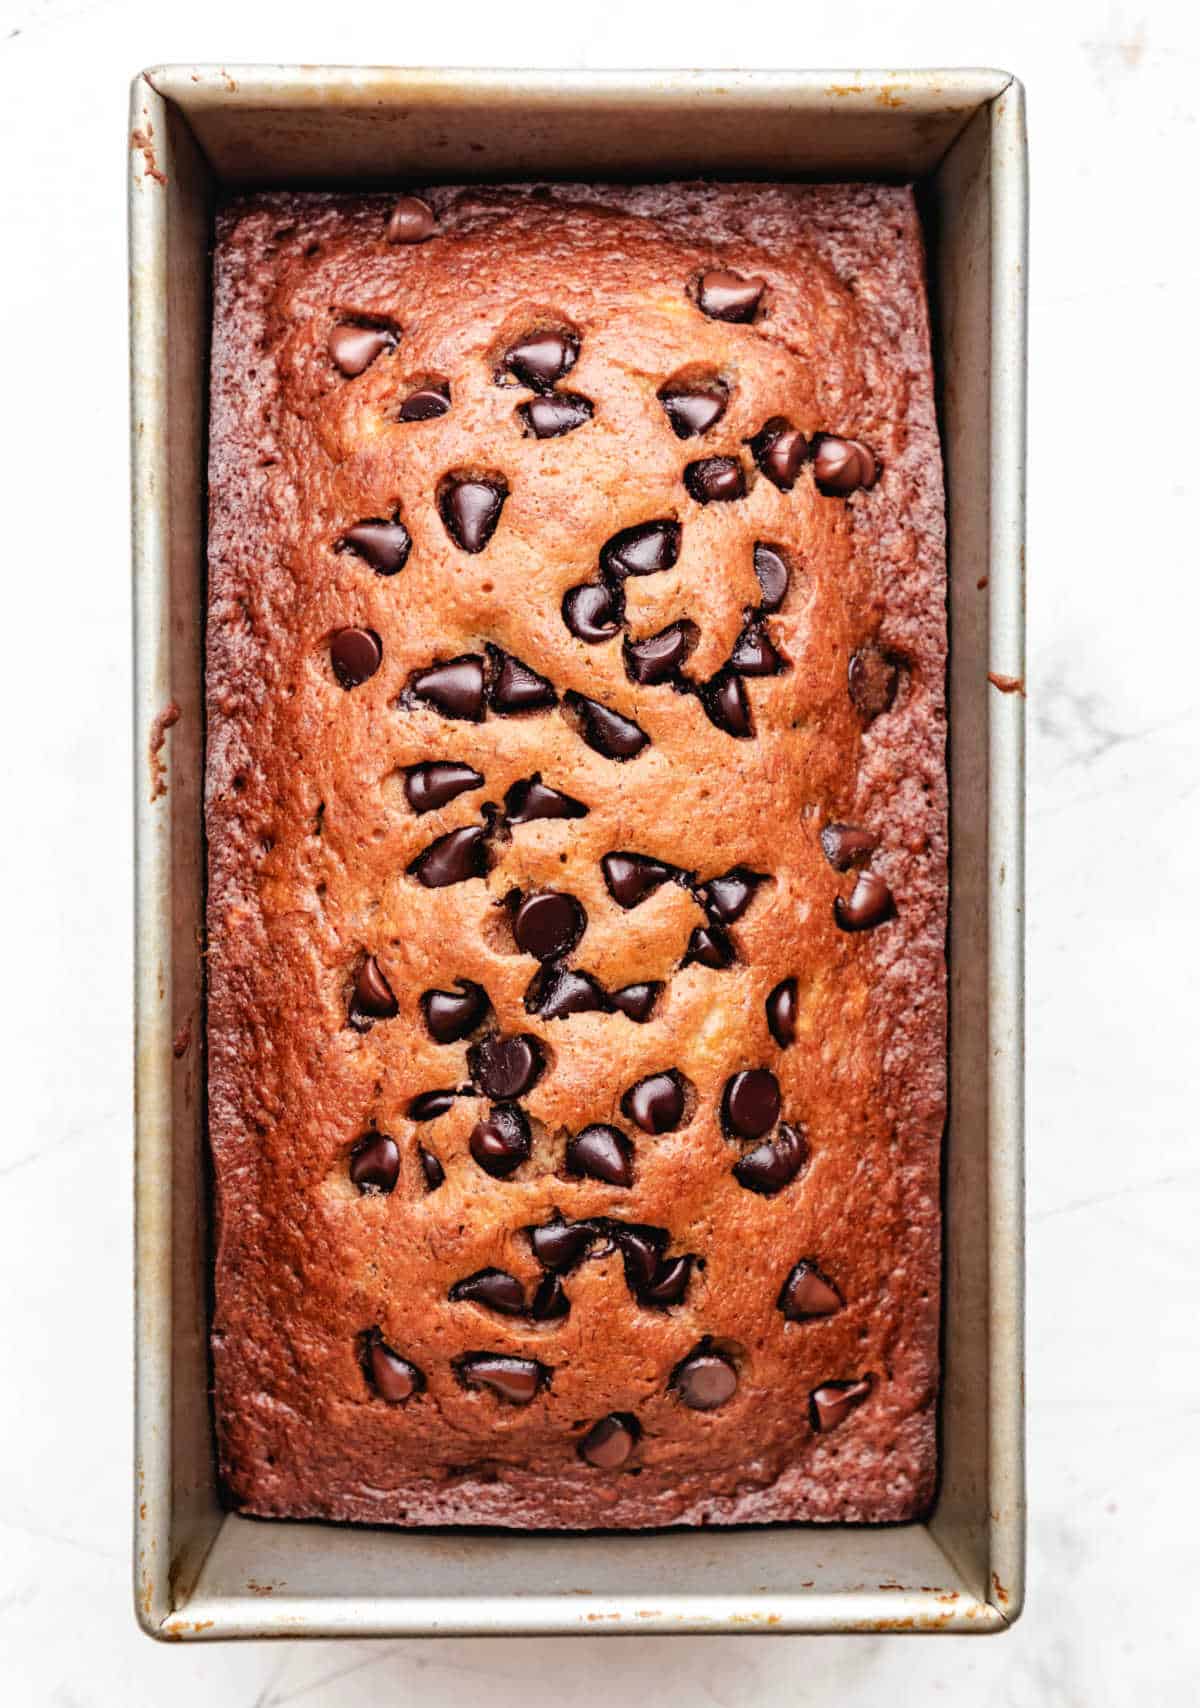 A baked loaf of chocolate chip banana bread in a loaf pan.